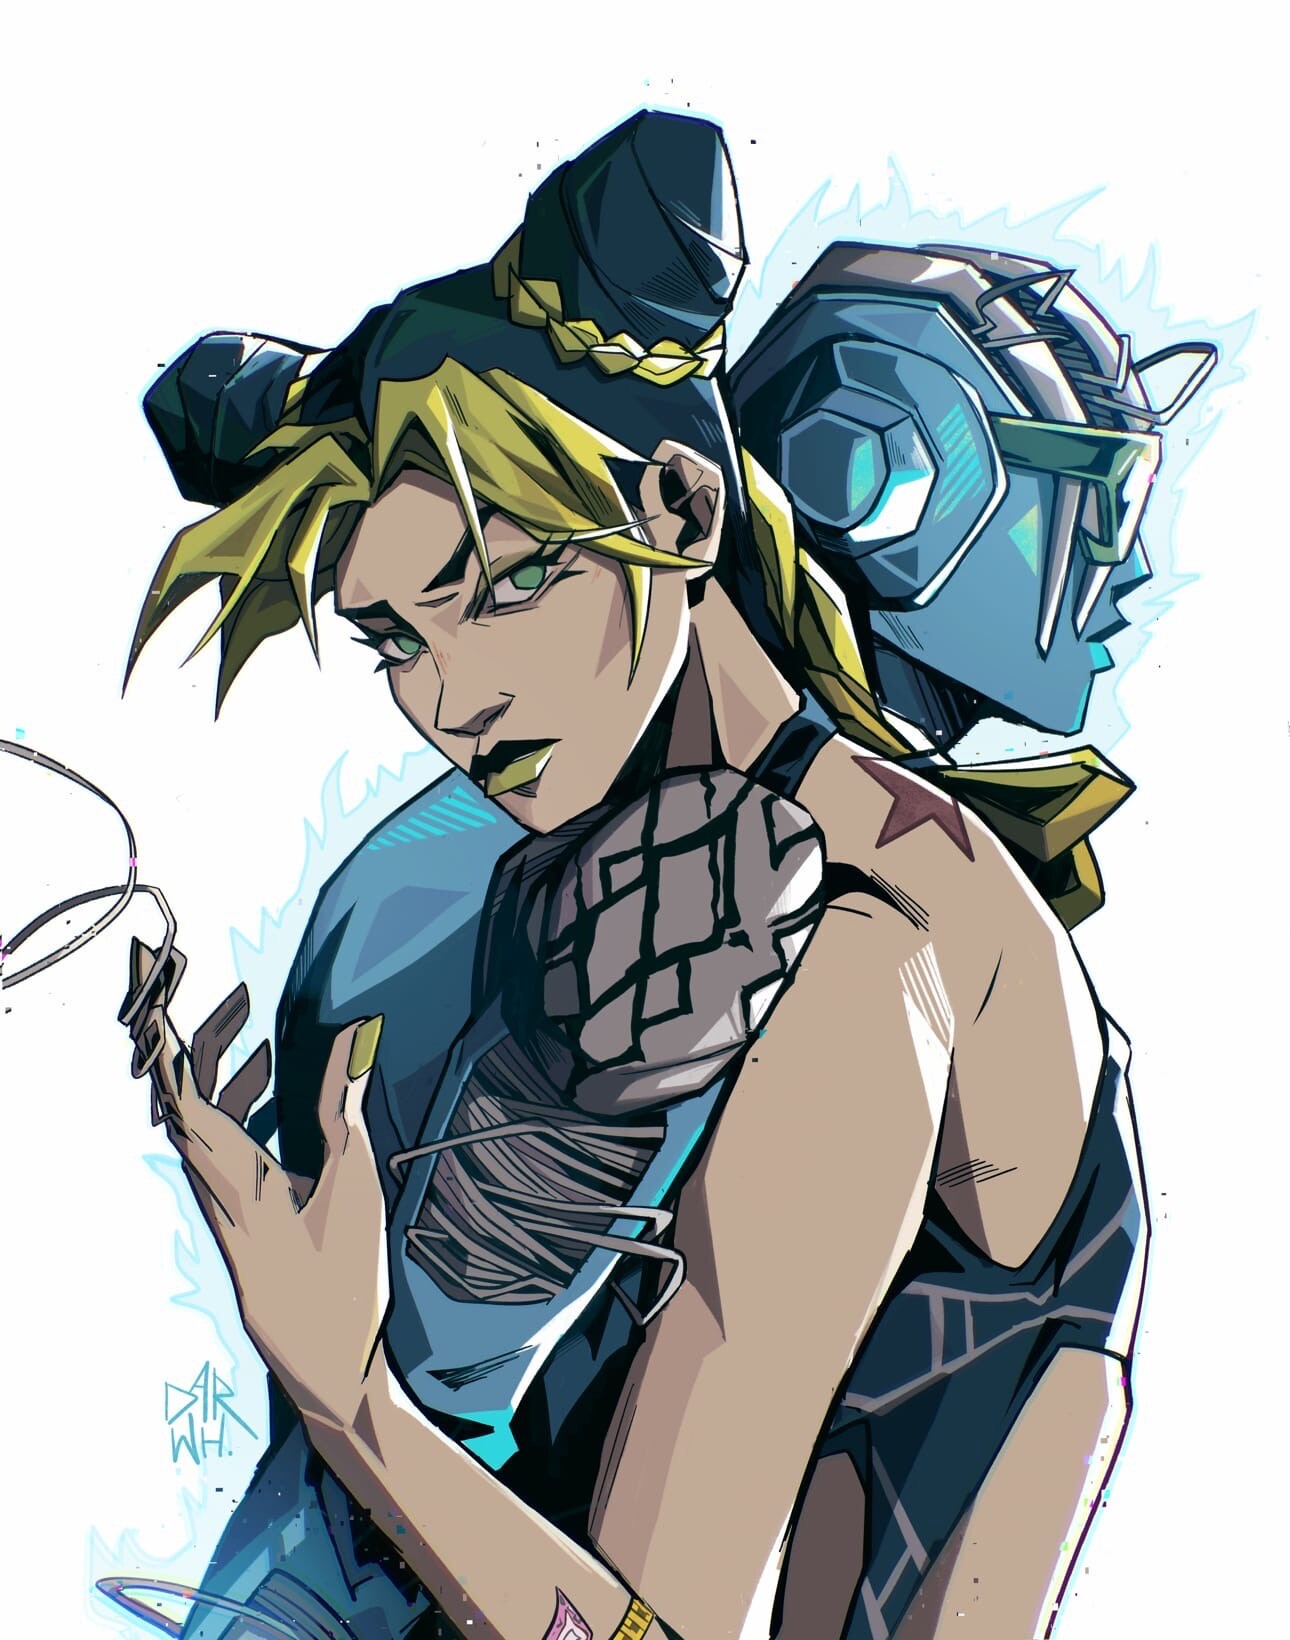 JJBA: Stone Ocean OC and stand by Clytemnon on DeviantArt